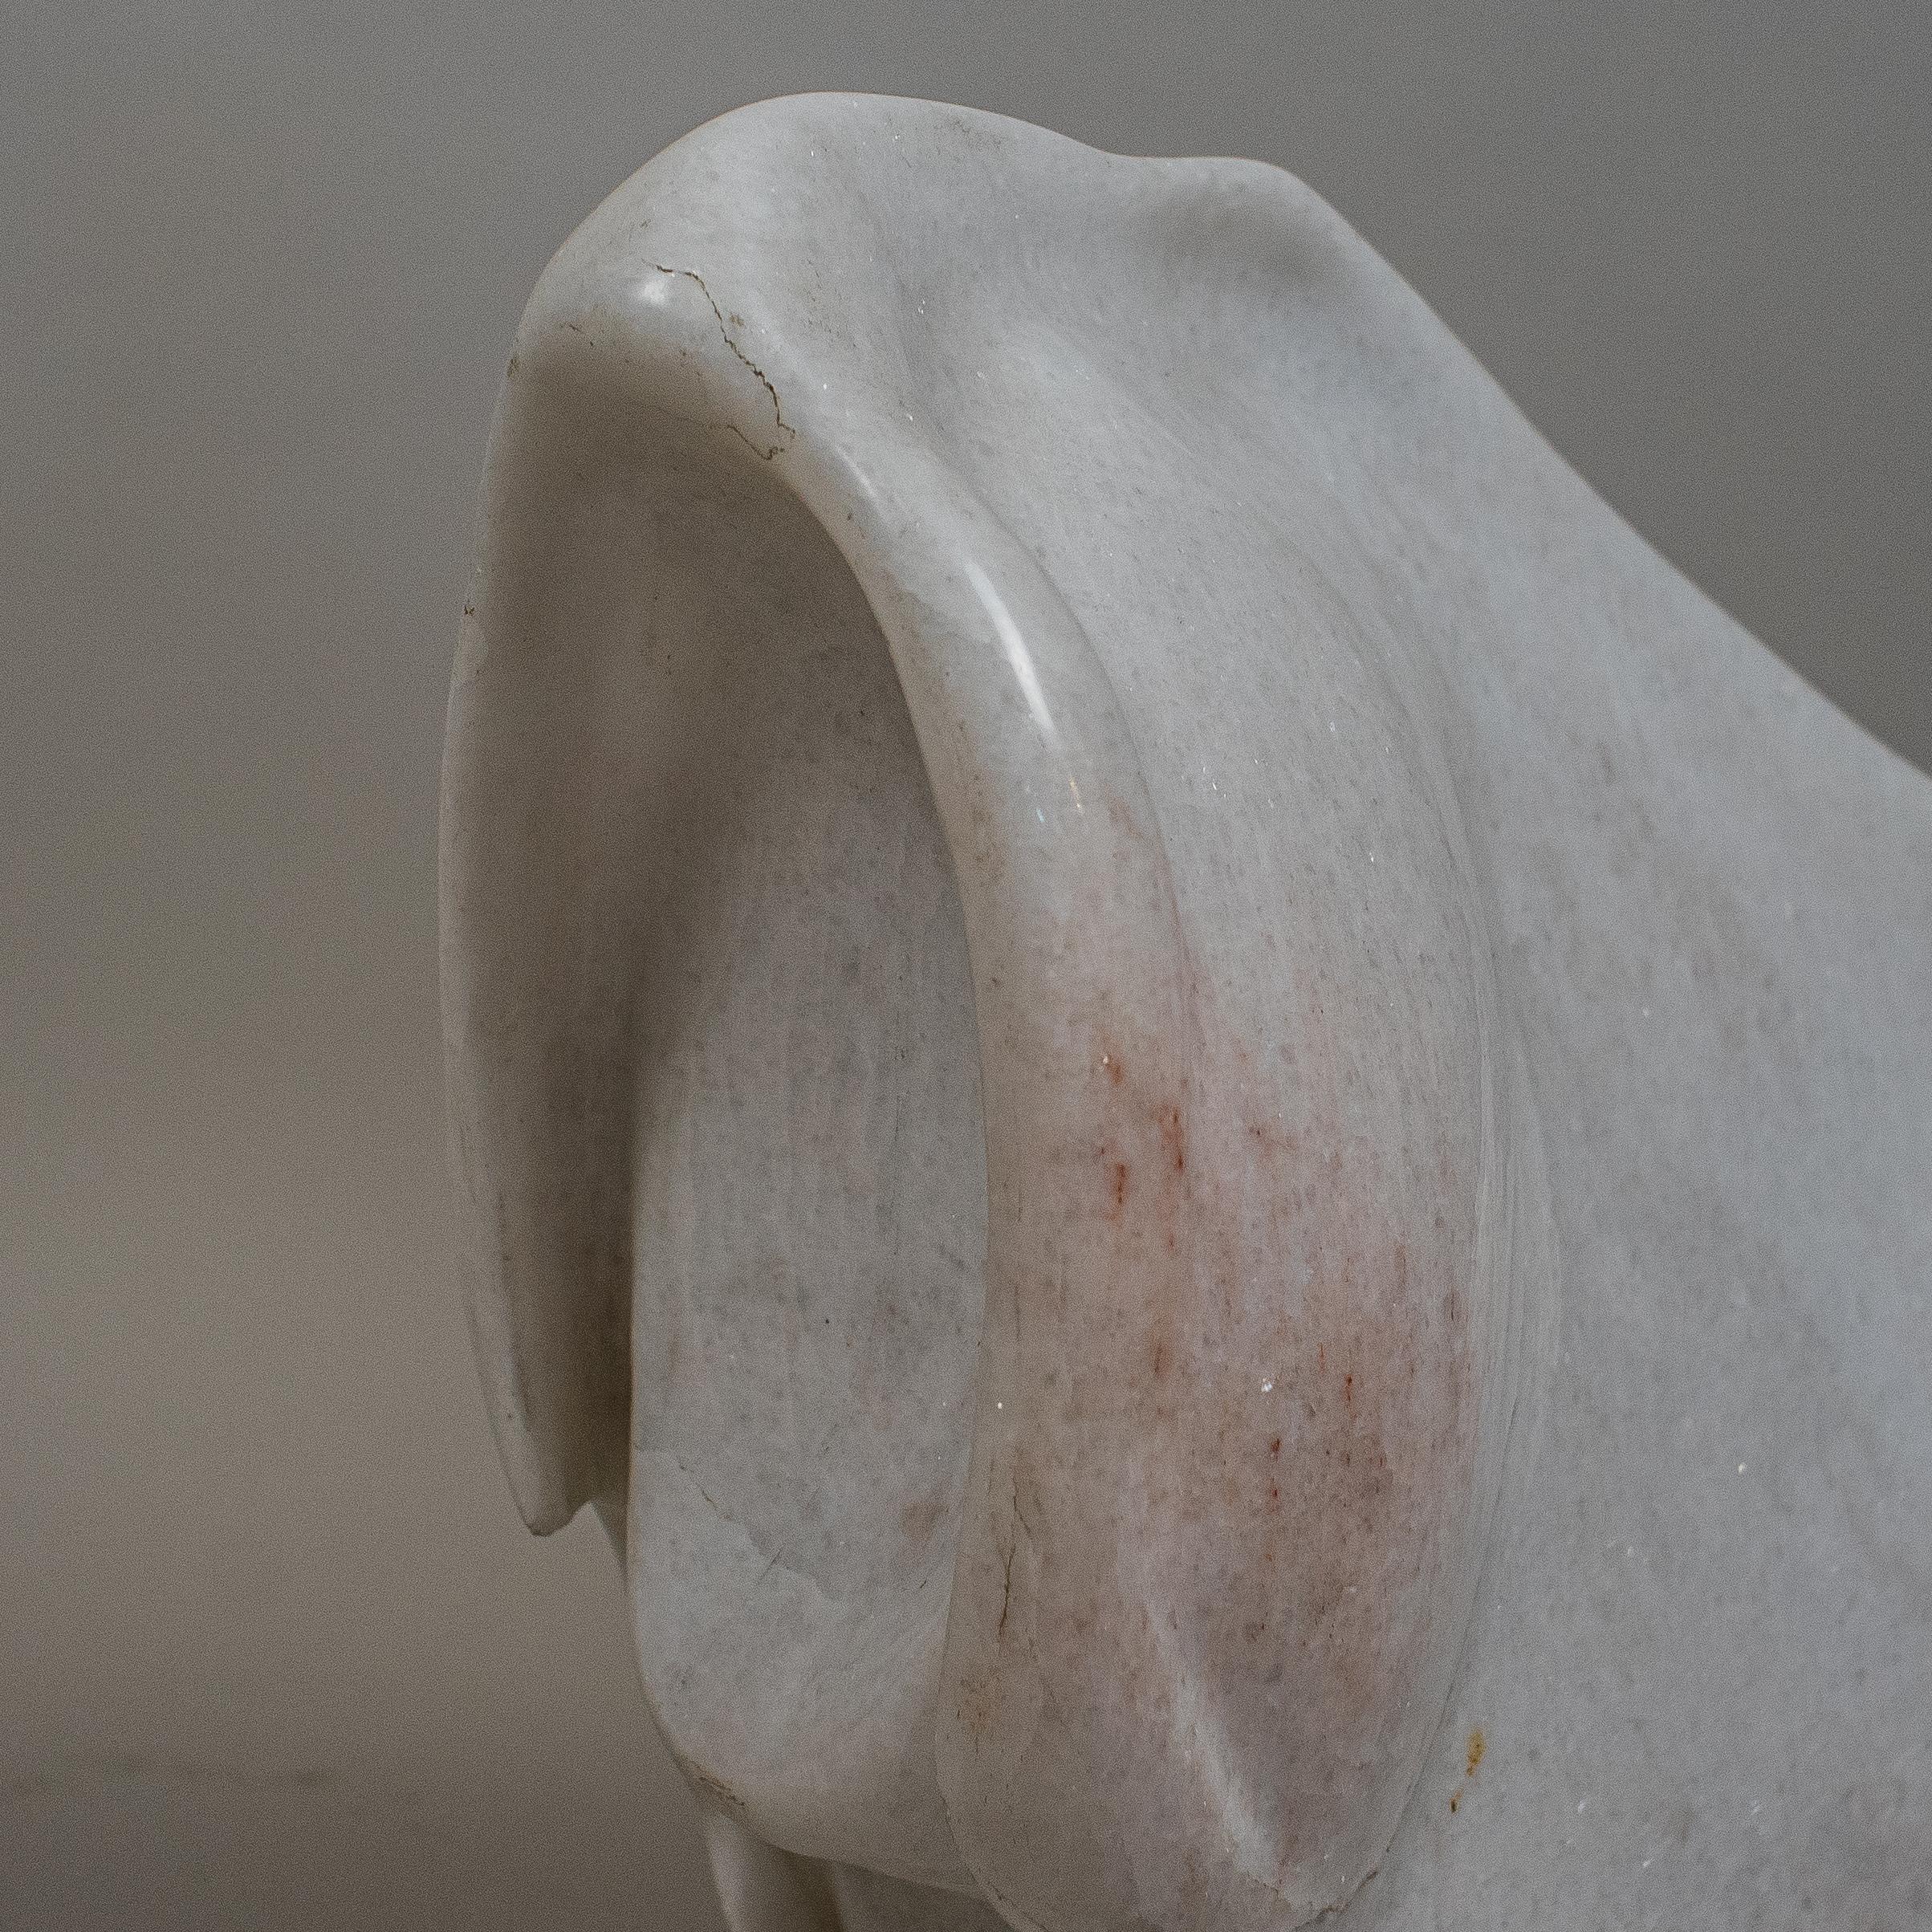 A white marble abstract sculpture signed Osmond. Dated 91. The white marble sculpture shows some mild shades of pink.